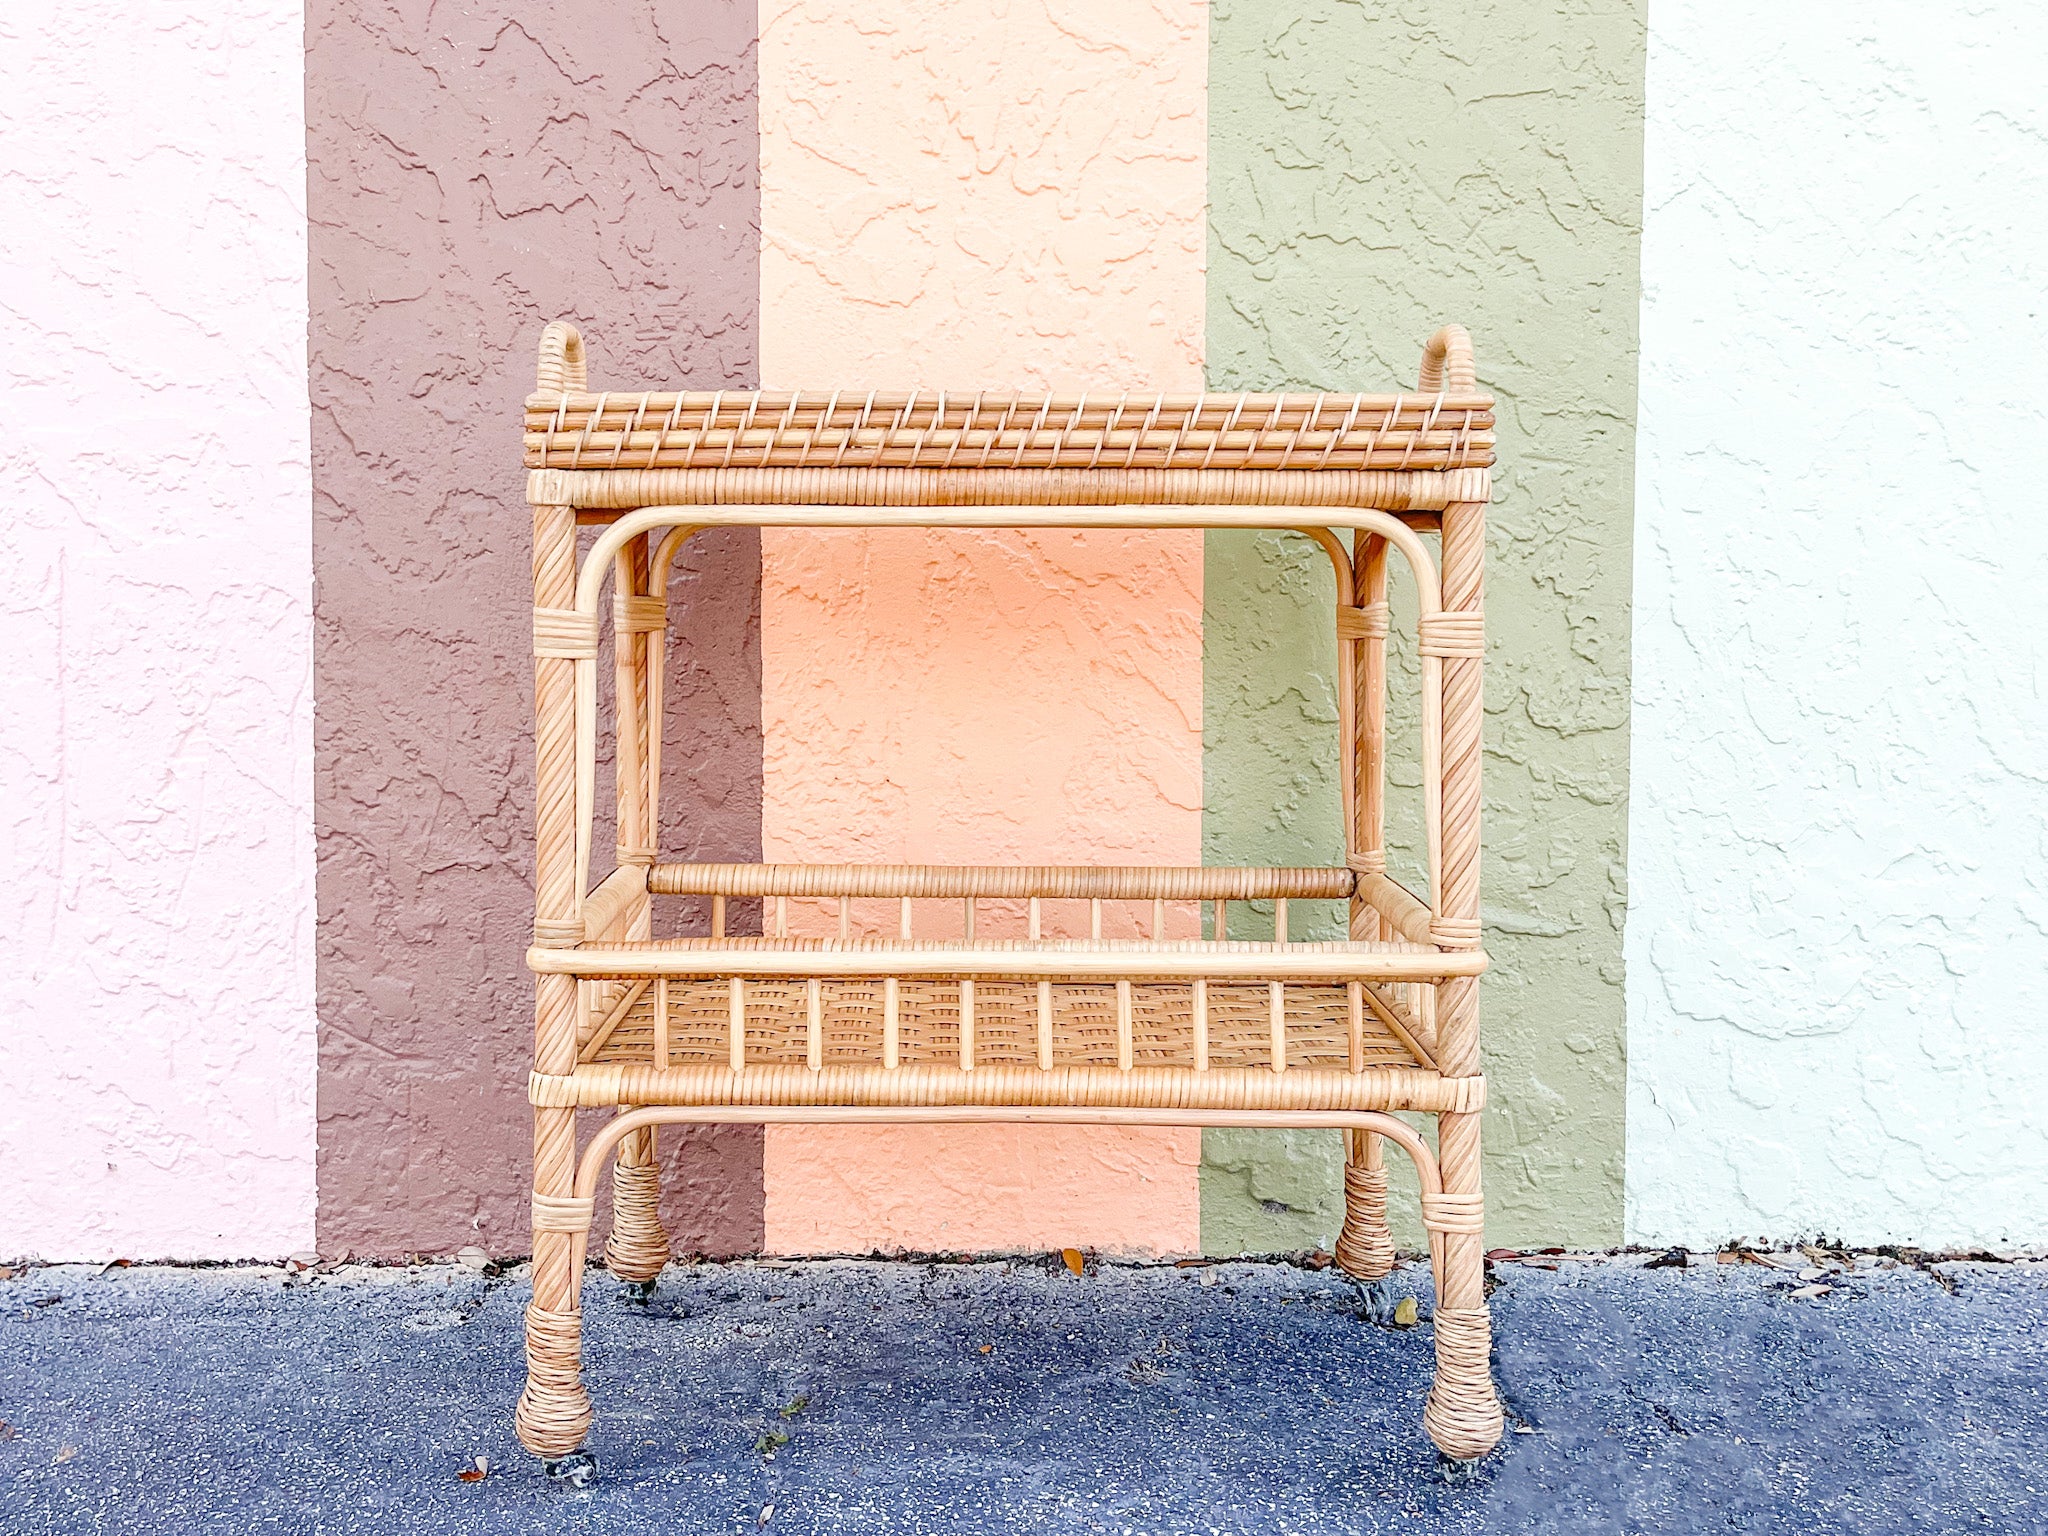 Vintage Palm Beach Wrapped Wicker Reed Rattan Bar Cart With Shelves & Doors